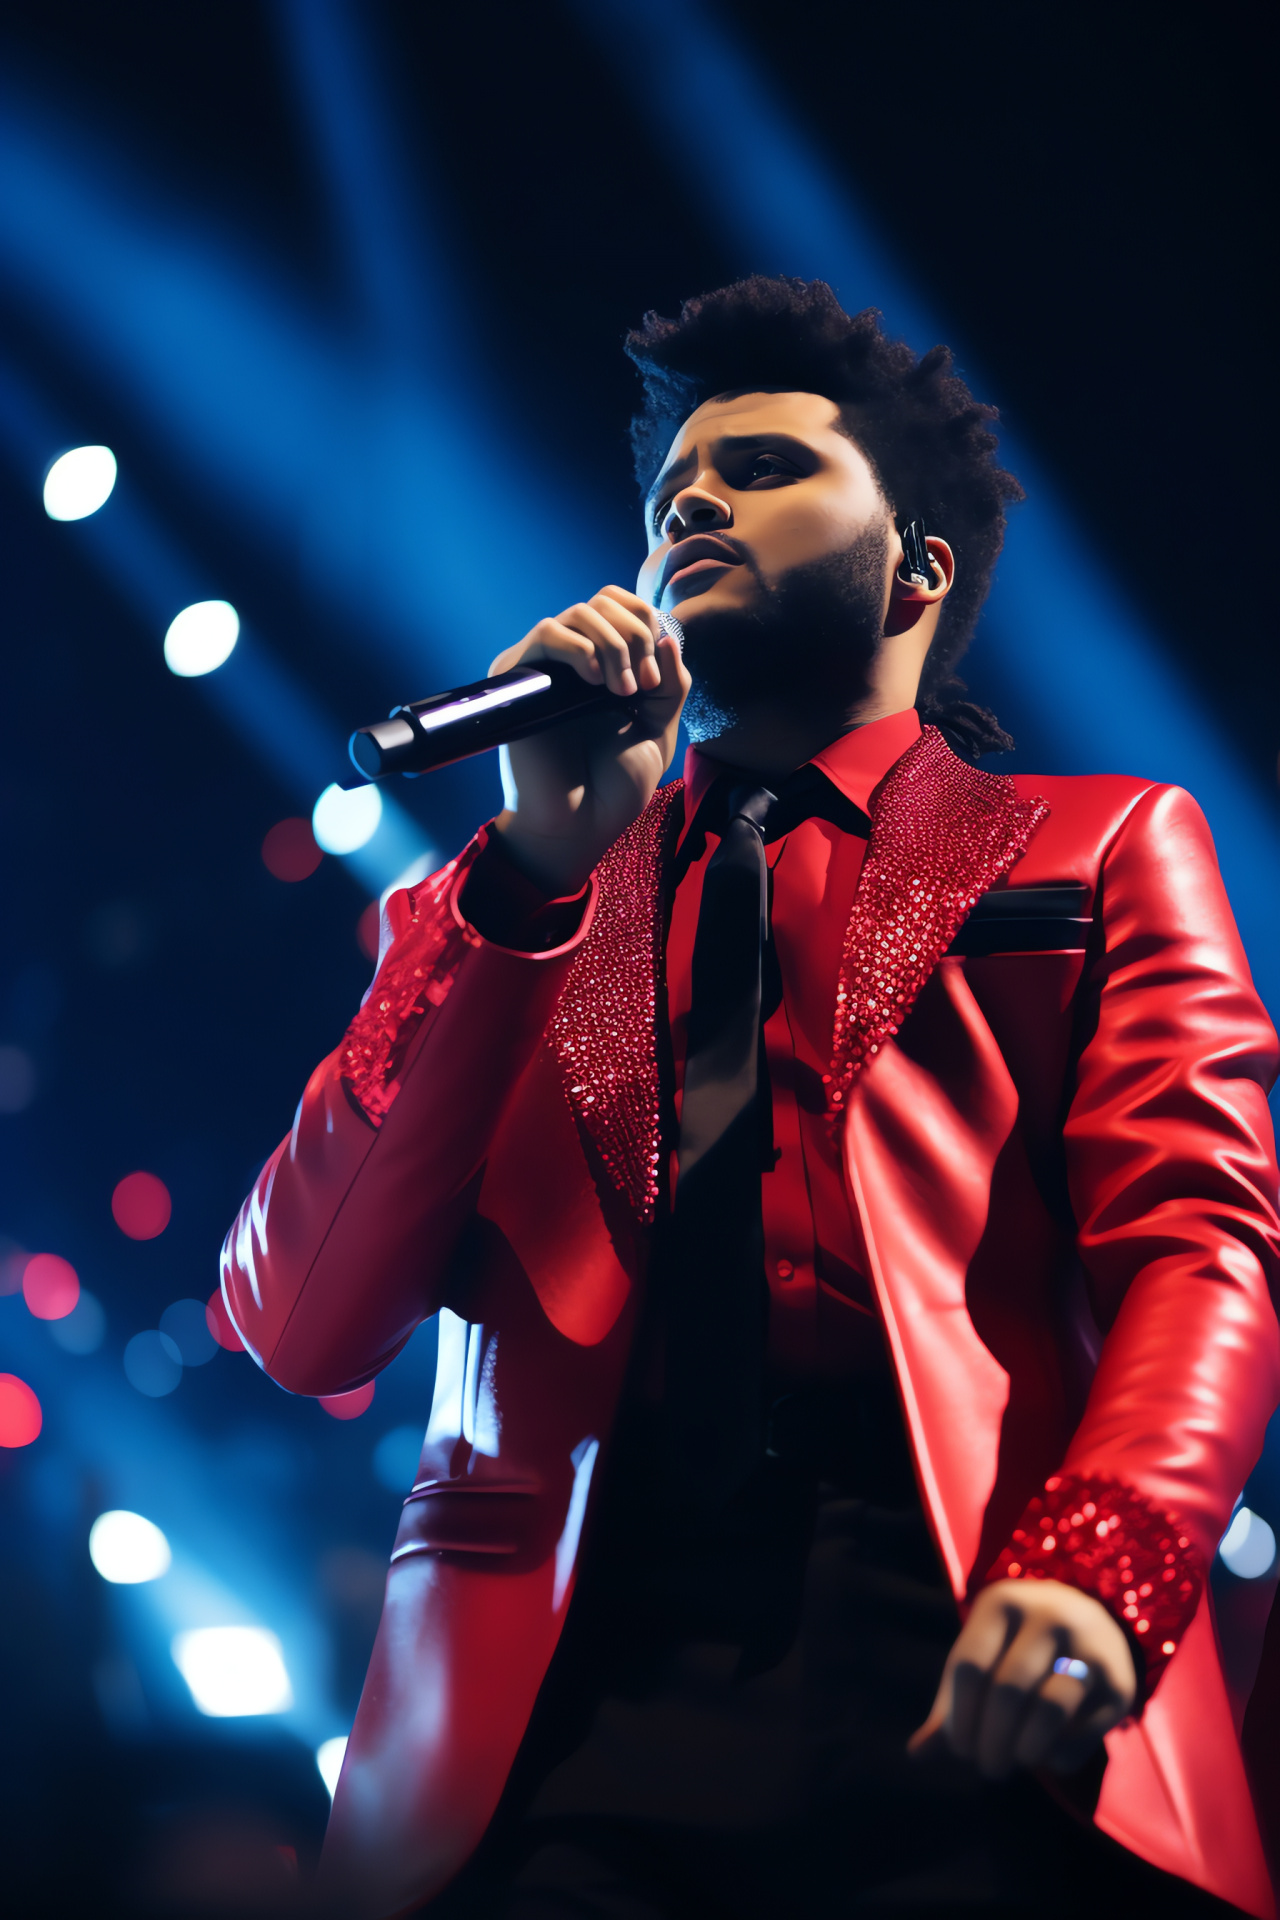 The Weeknd at event, Half-time entertainment, Dazzling light show, Bright outfit, Stage accessory, HD Phone Wallpaper